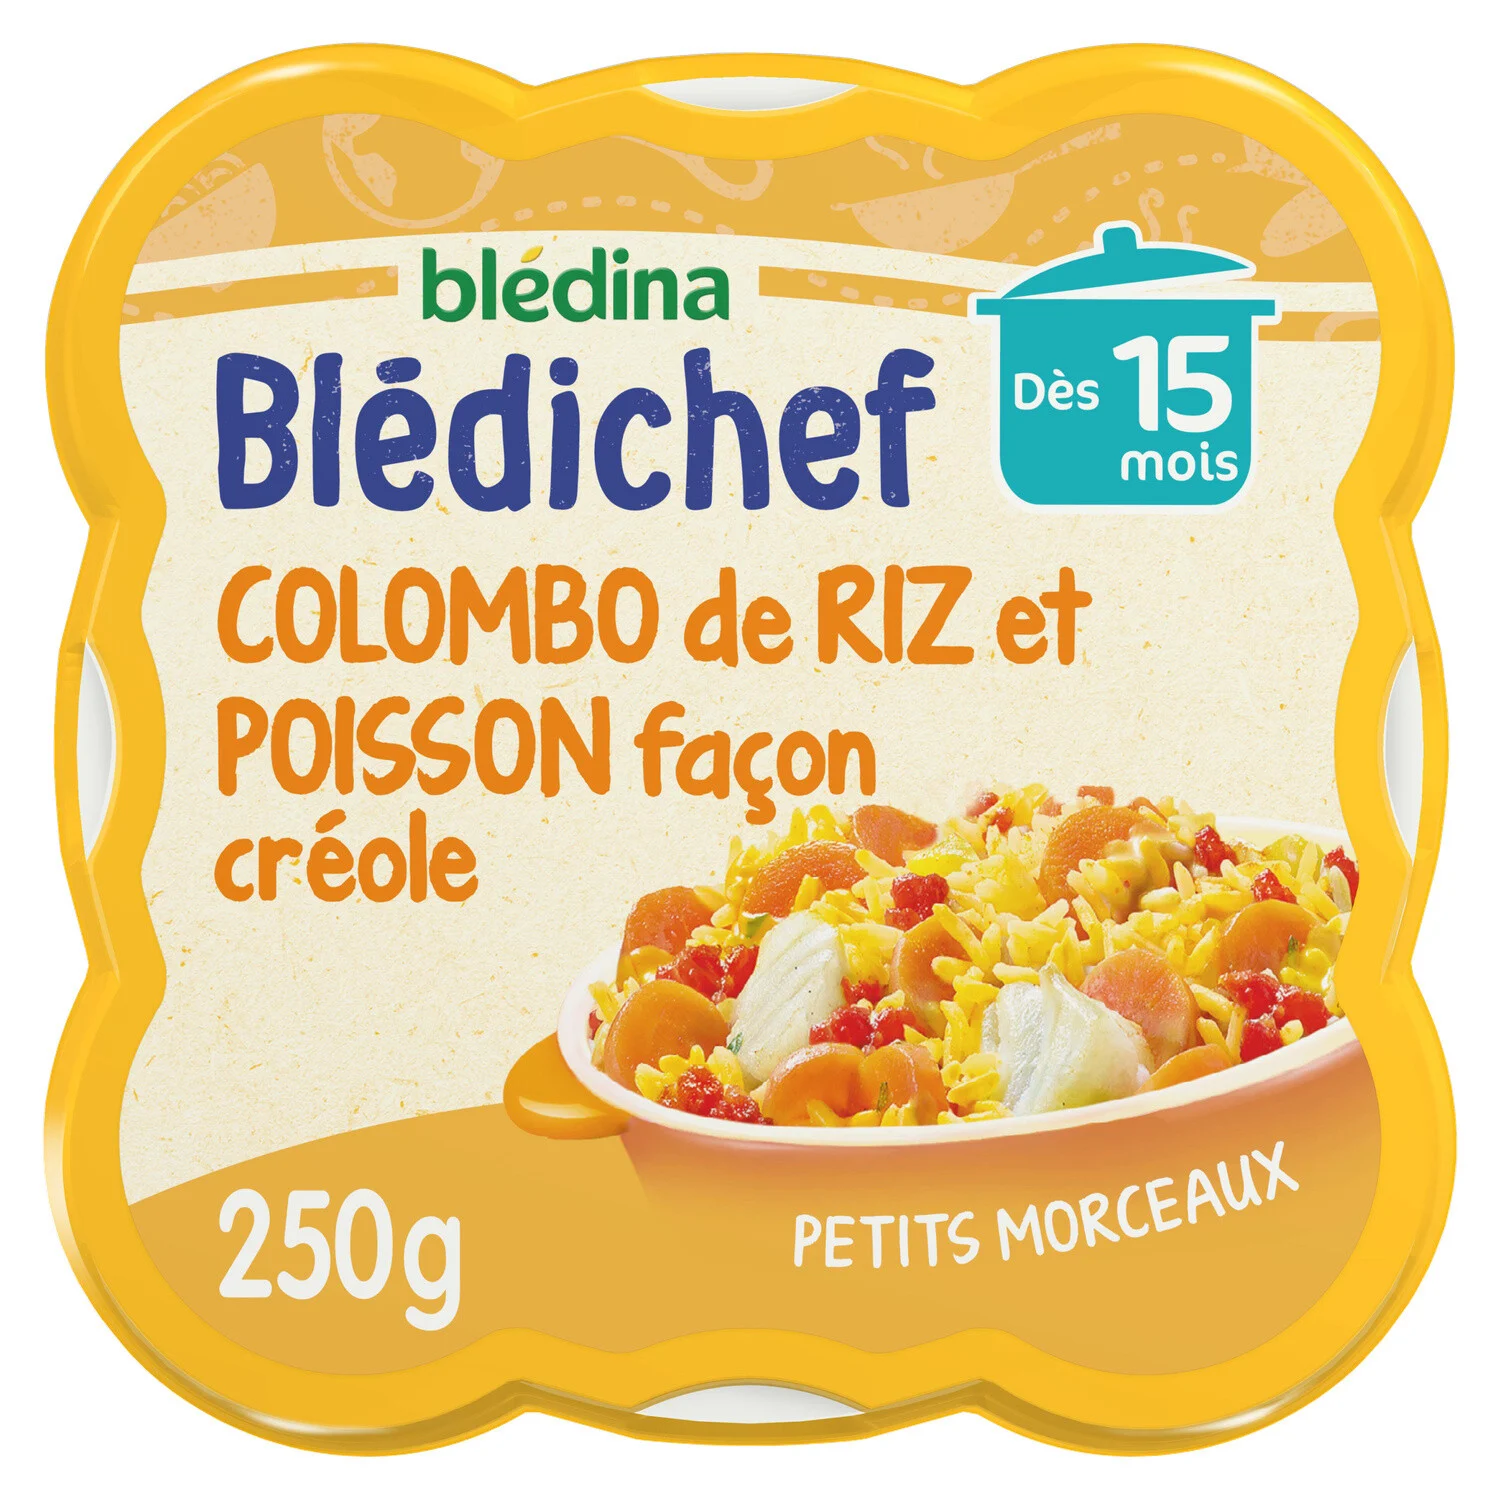 Bledina Bledichef creole style Rice & Fish Colombo from 15 months 250g